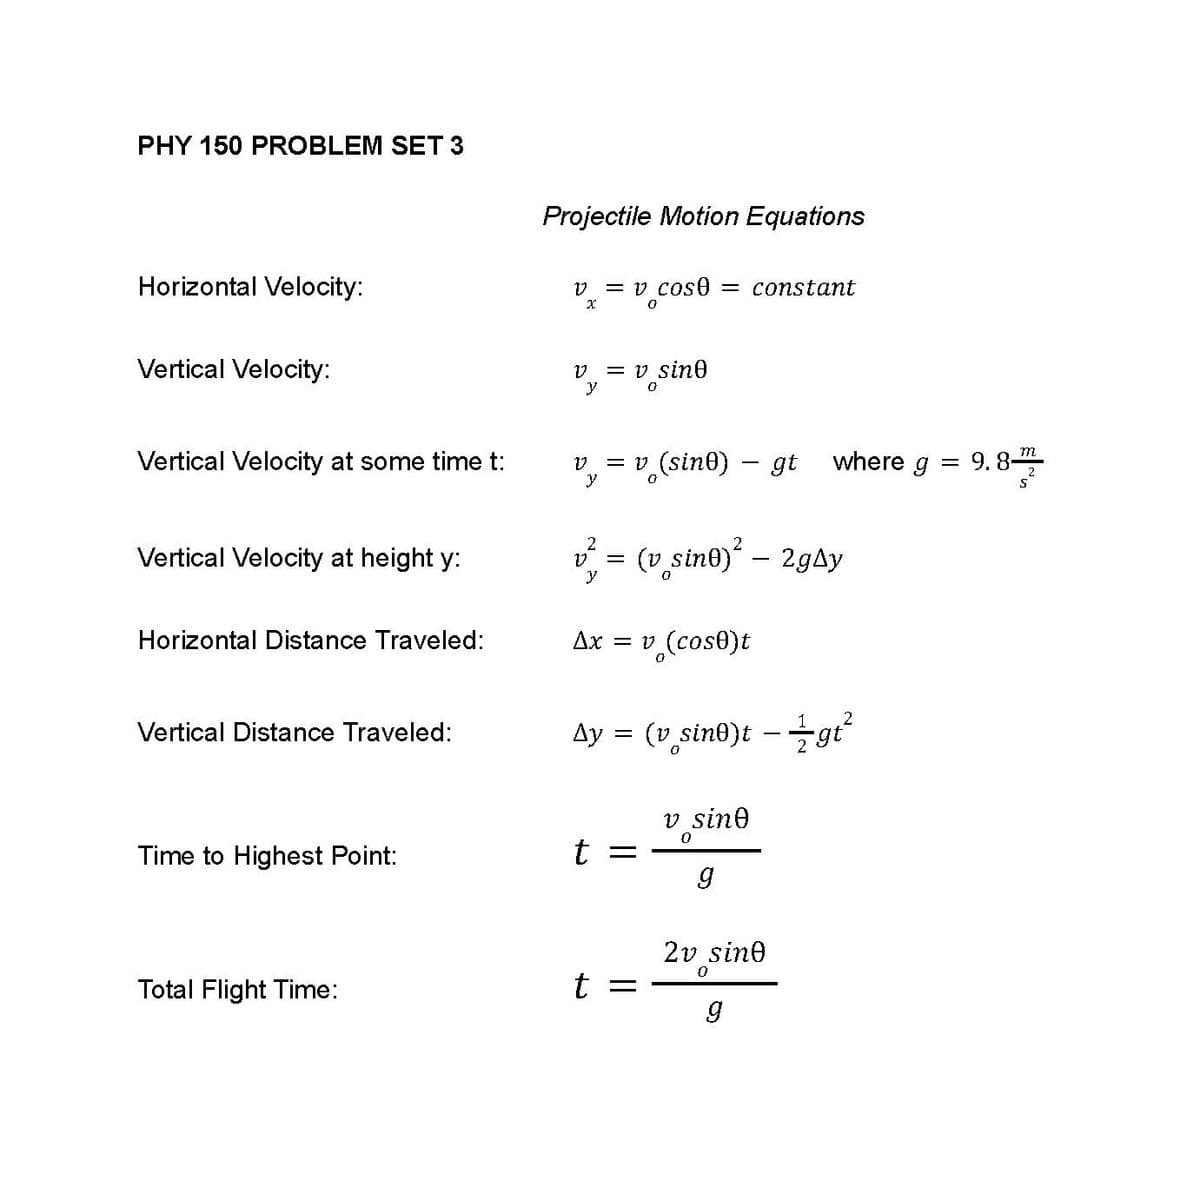 PHY 150 PROBLEM SET 3
Horizontal Velocity:
Vertical Velocity:
Vertical Velocity at some time t:
Vertical Velocity at height y:
Horizontal Distance Traveled:
Vertical Distance Traveled:
Time to Highest Point:
Total Flight Time:
Projectile Motion Equations
v = v cose = constant
X
0
V = v sine
0
V = v (sin0) - gt
y
2
2
(v sine)² - 2gAy
y
Ax = v (cos0)t
Ay = (v sine)t +gi²
v sine
0
t =
g
2v sine
0
t
=
g
where g
=
m
9. 8-